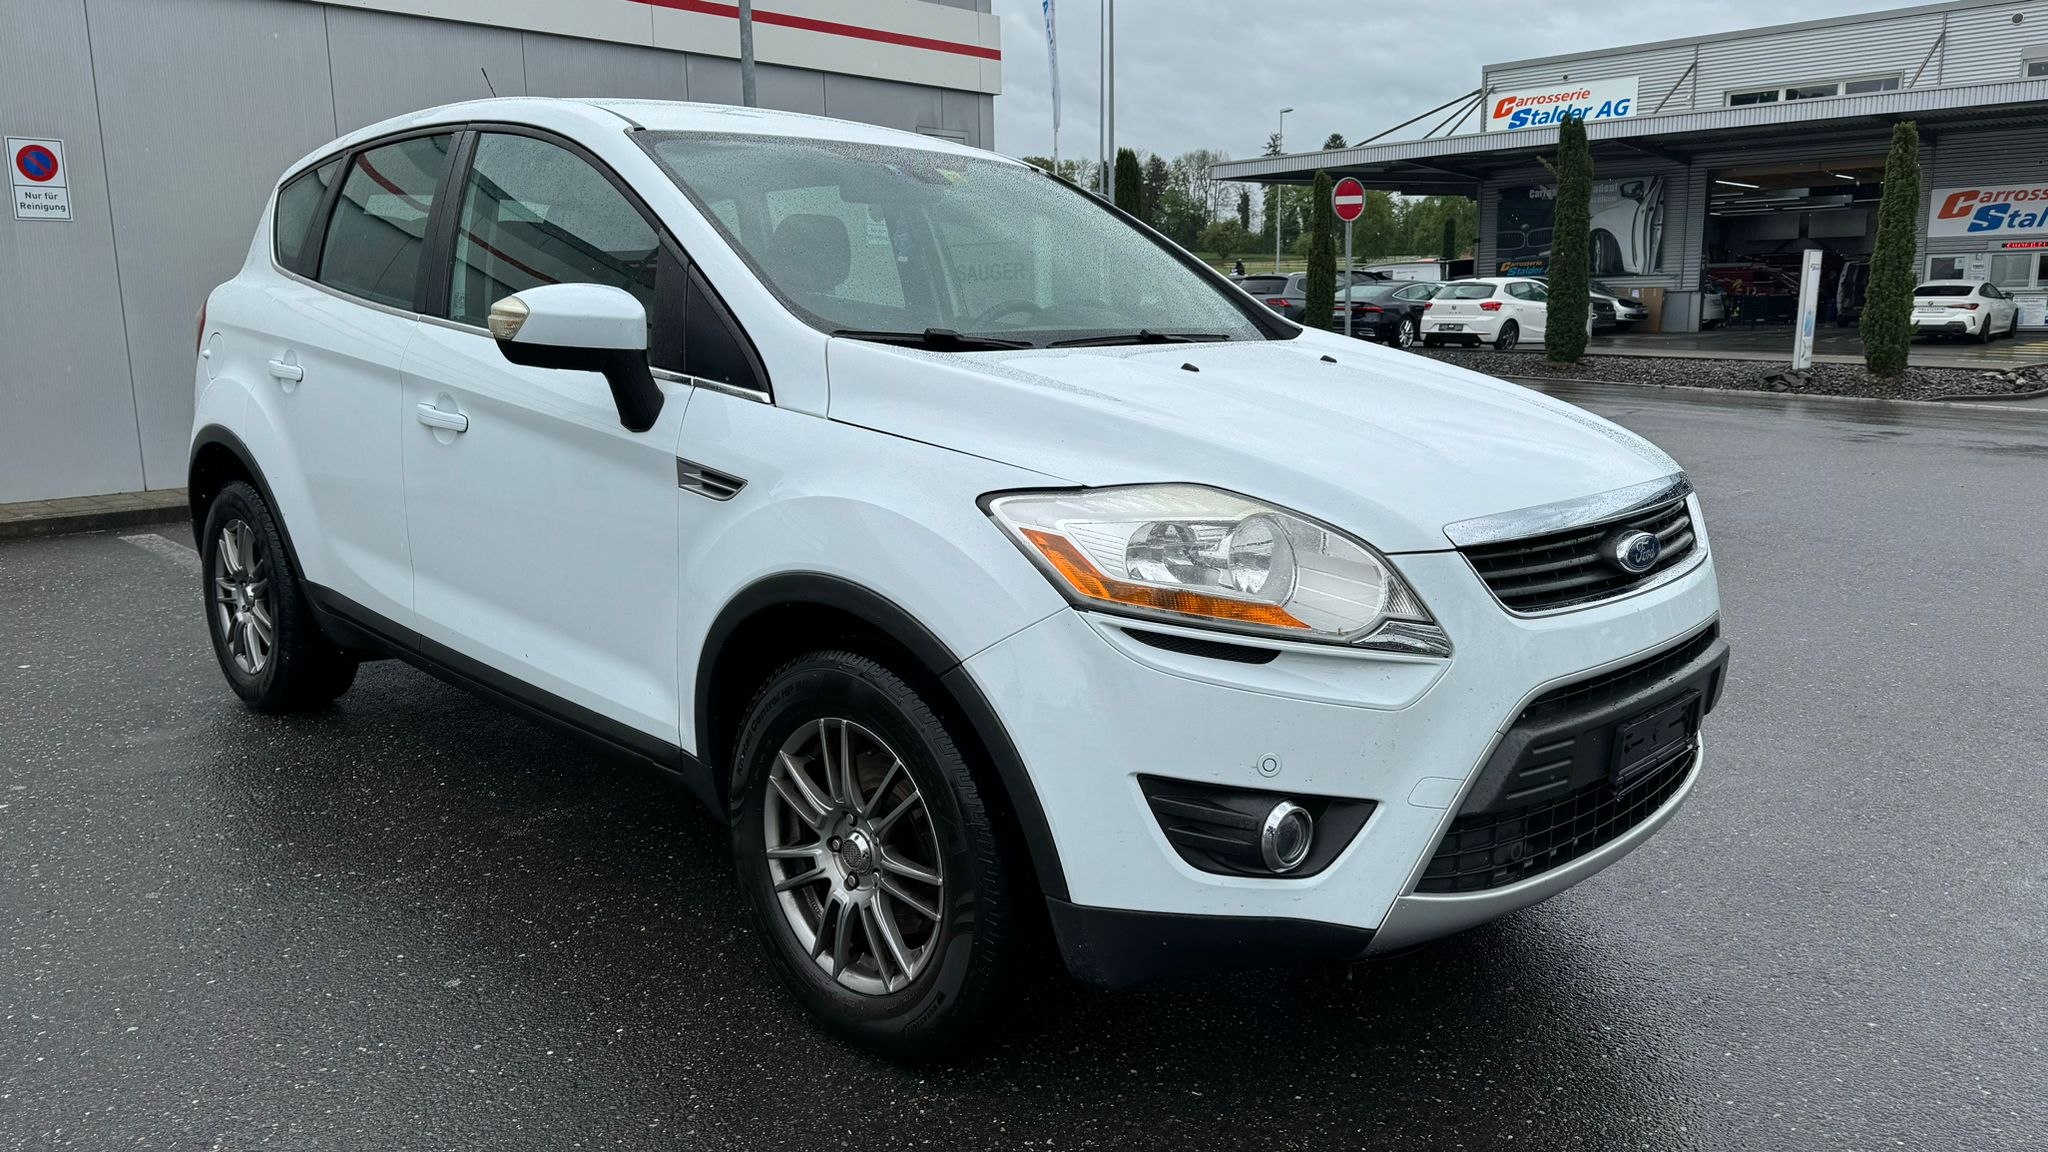 FORD Kuga 2.0 TDCi Carving 4WD